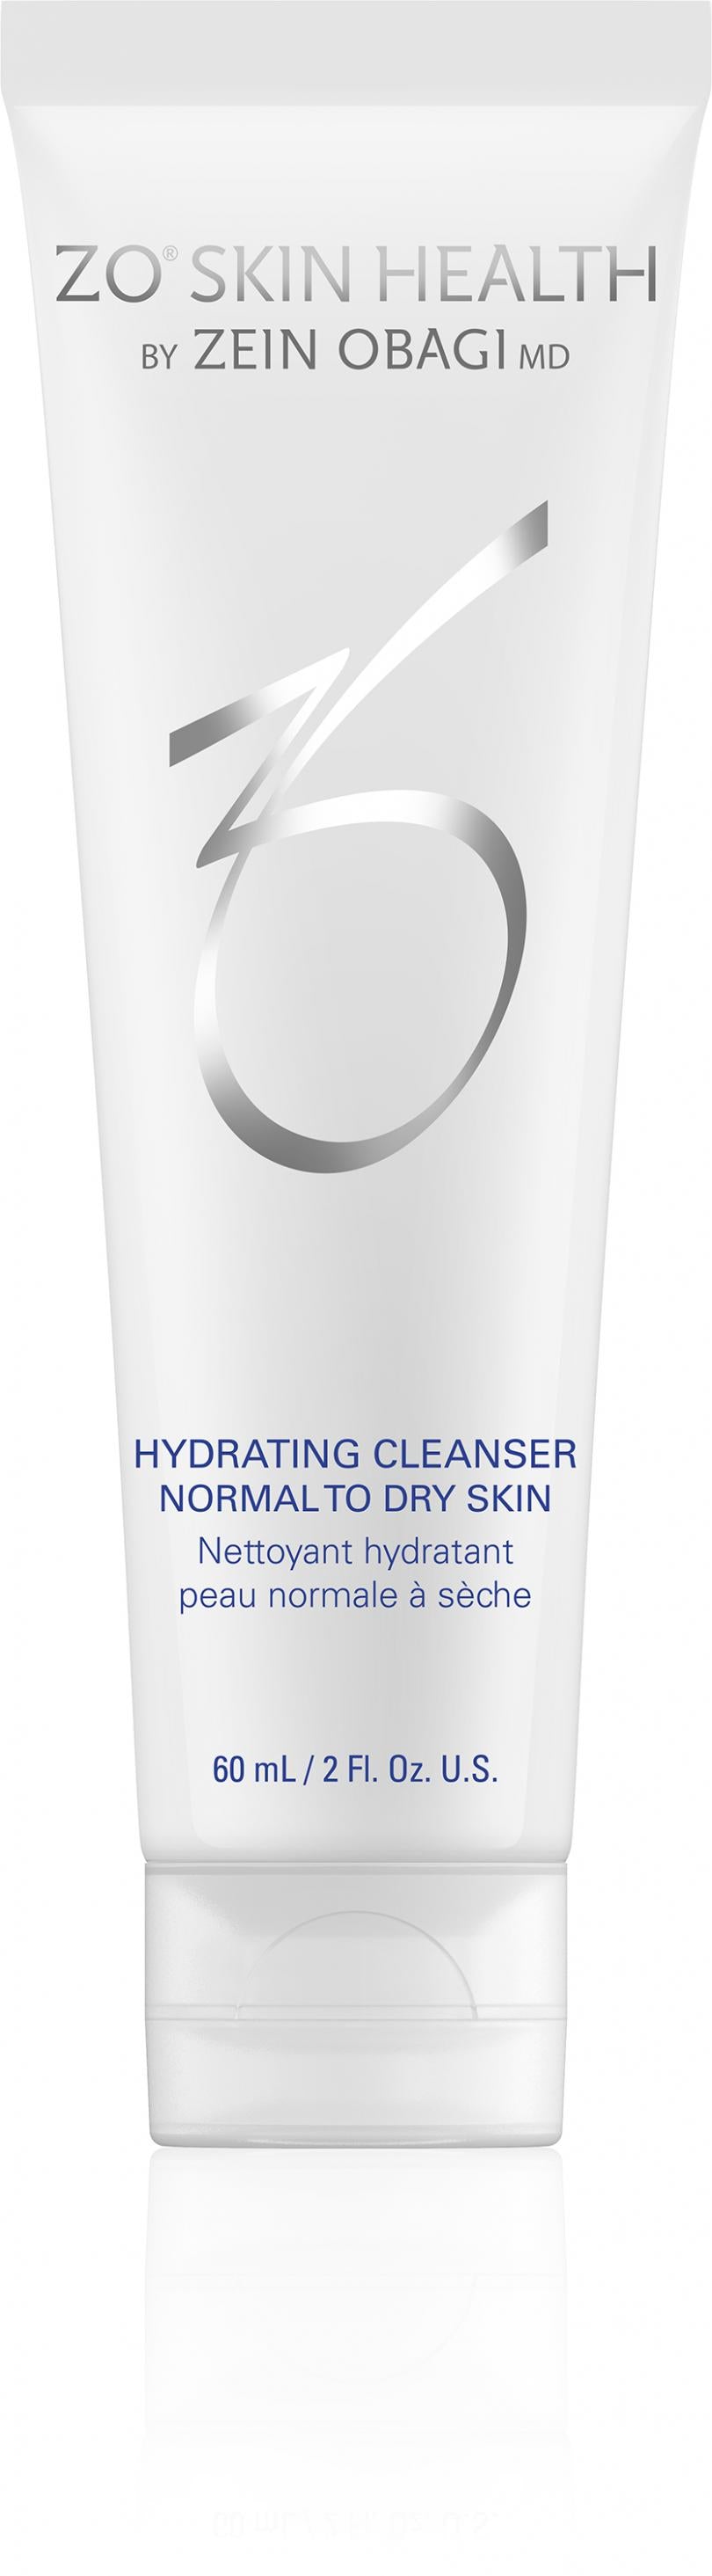 Hydrating Cleanser Normal to Dry Skin 60ML